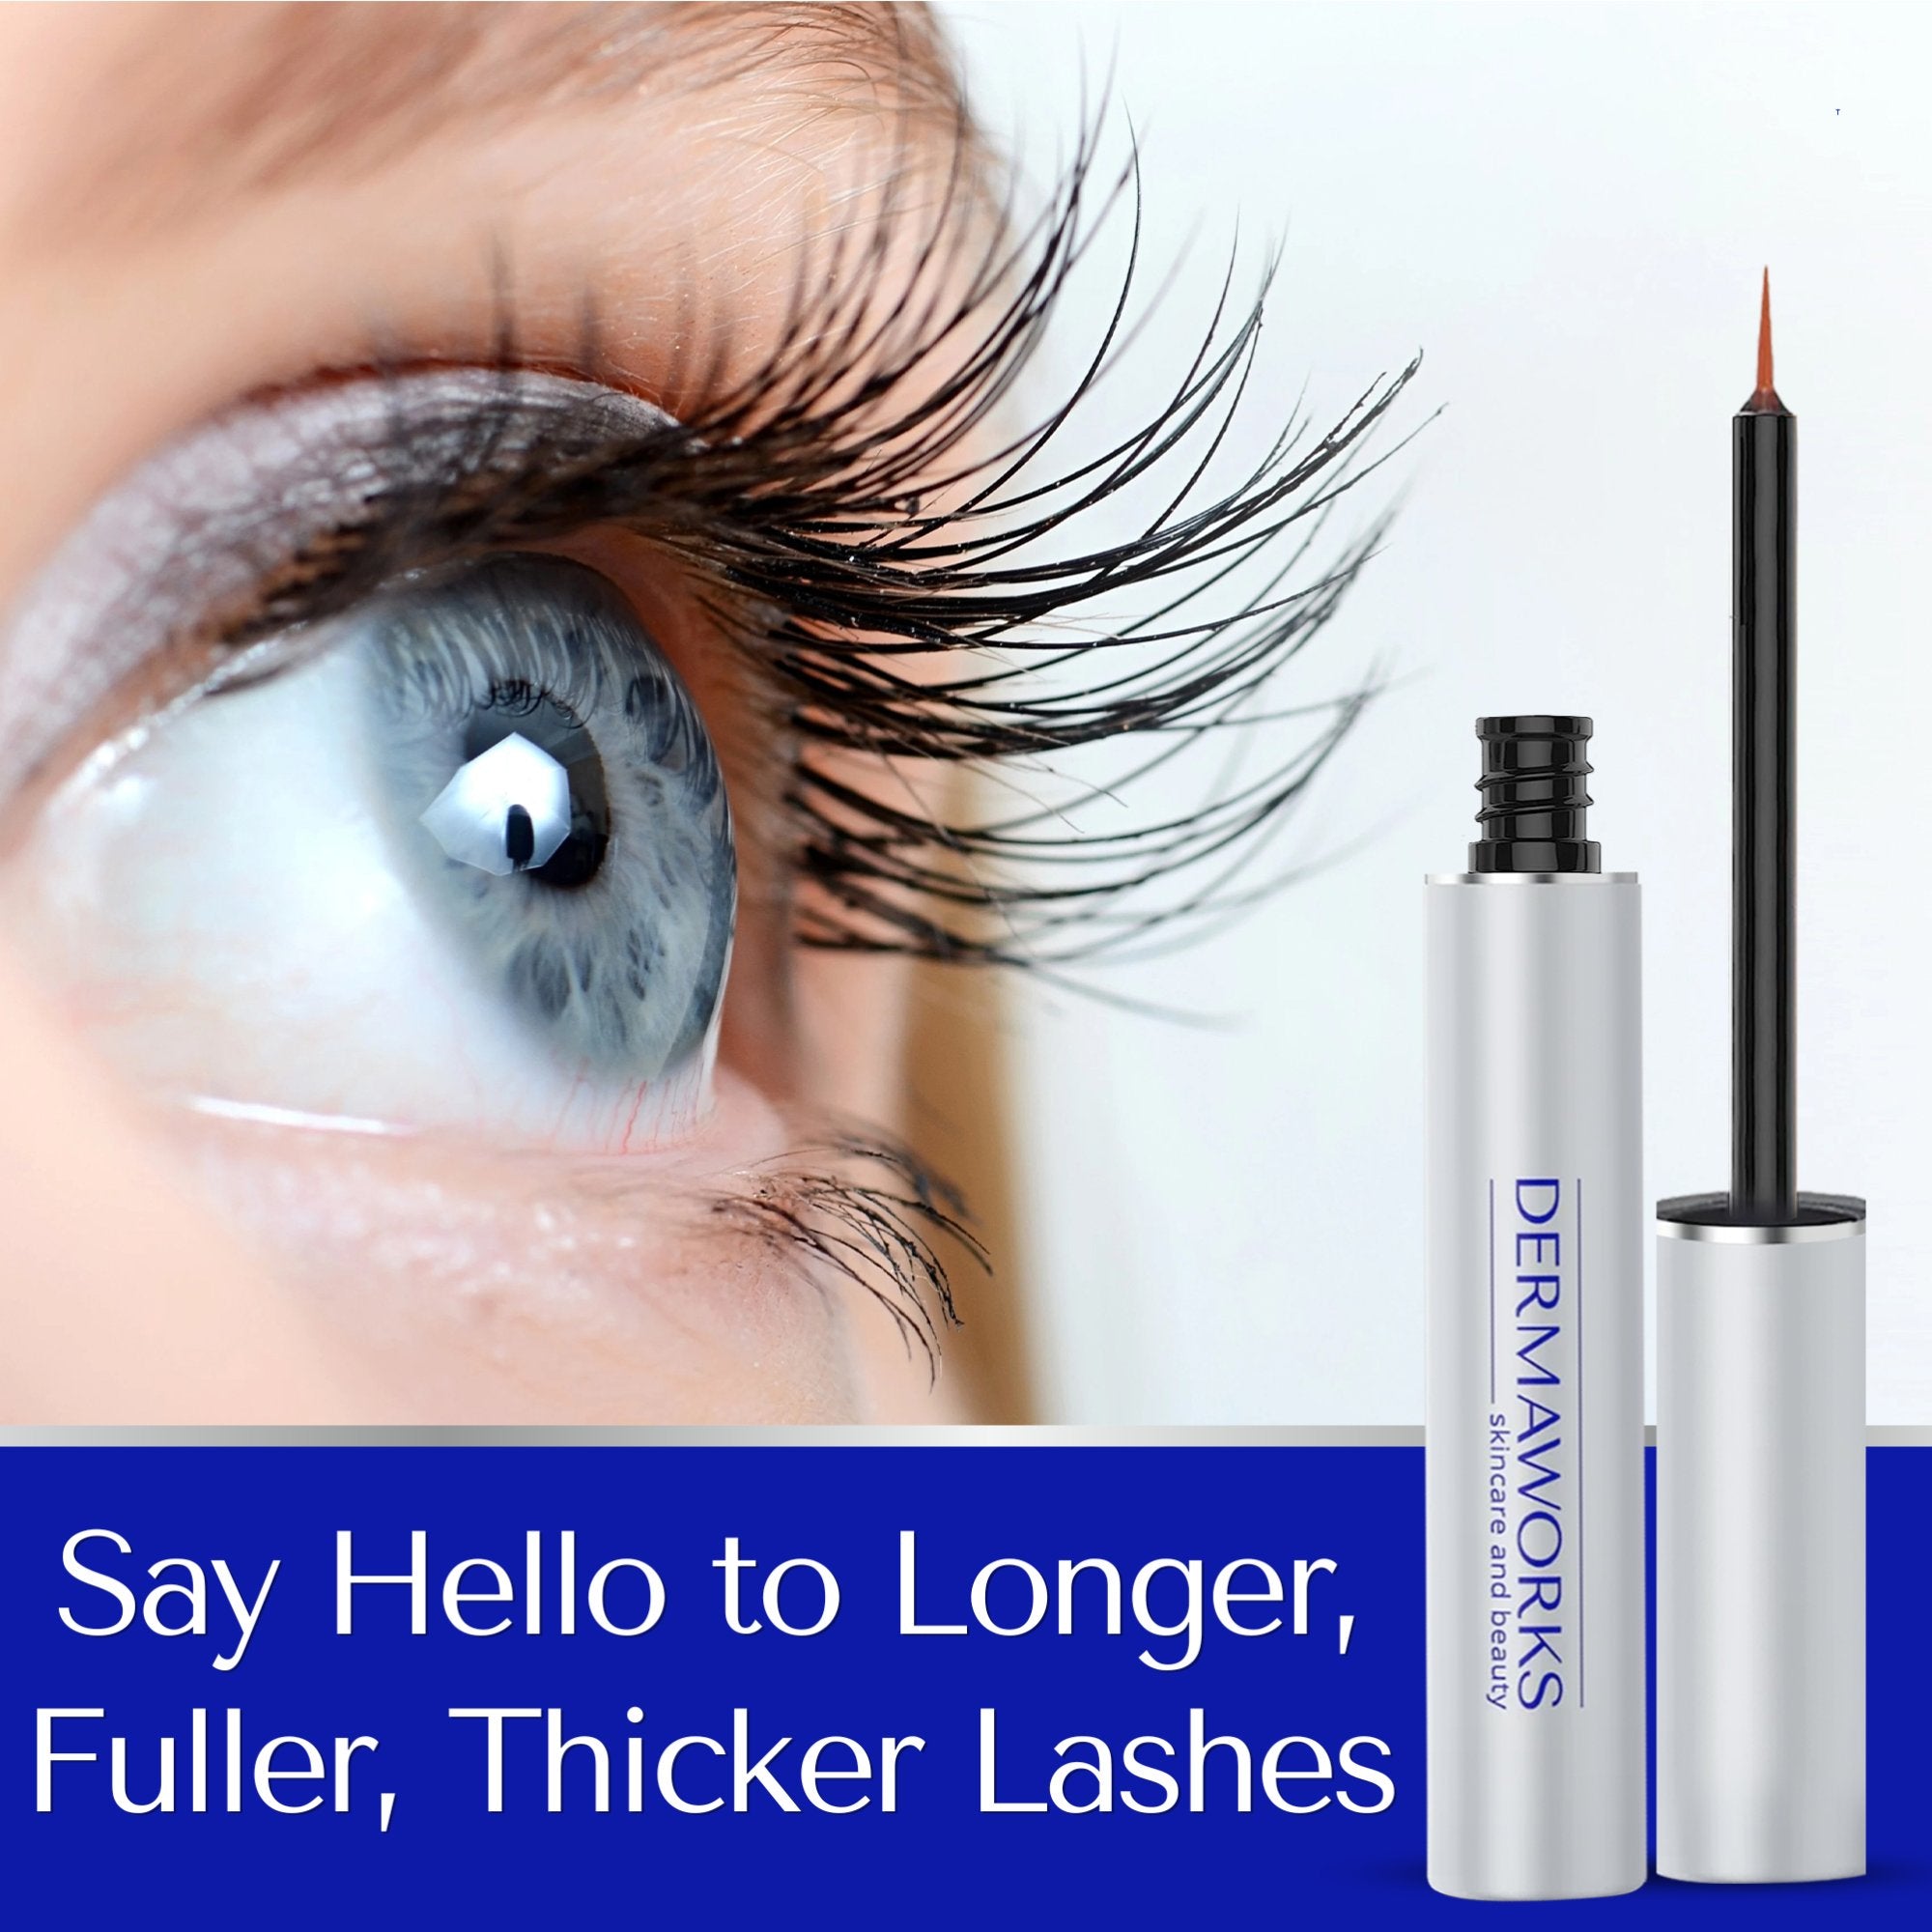 Say hello to longer, fuller and thicker lashes with Spectaculash lash serum by Dermaworks